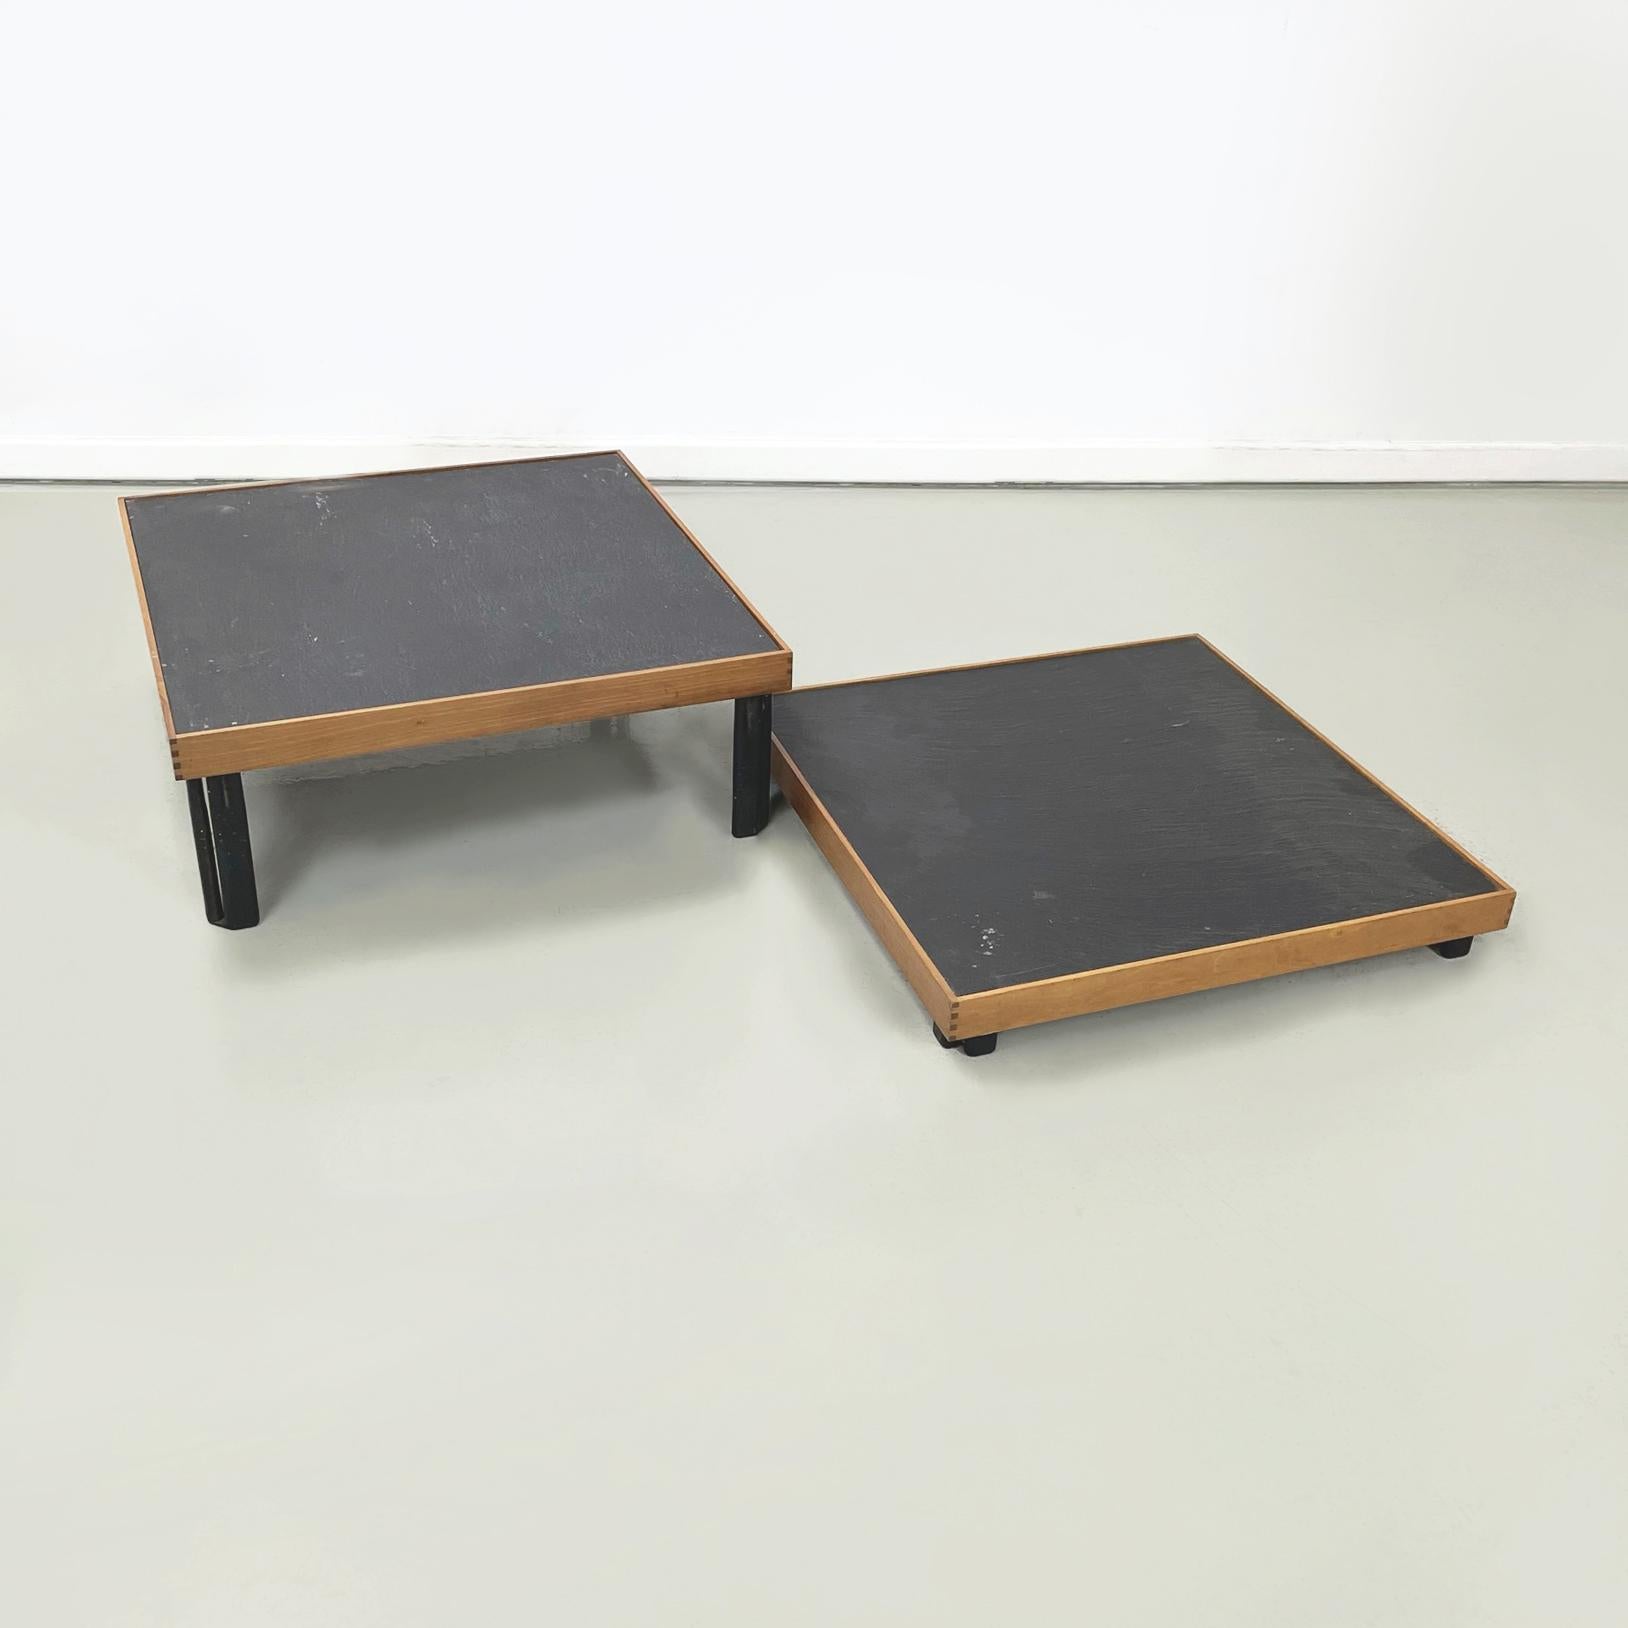 Late 20th Century Italian modern Slate wood metal Coffee tables by De Martini for Cassina, 1980s For Sale